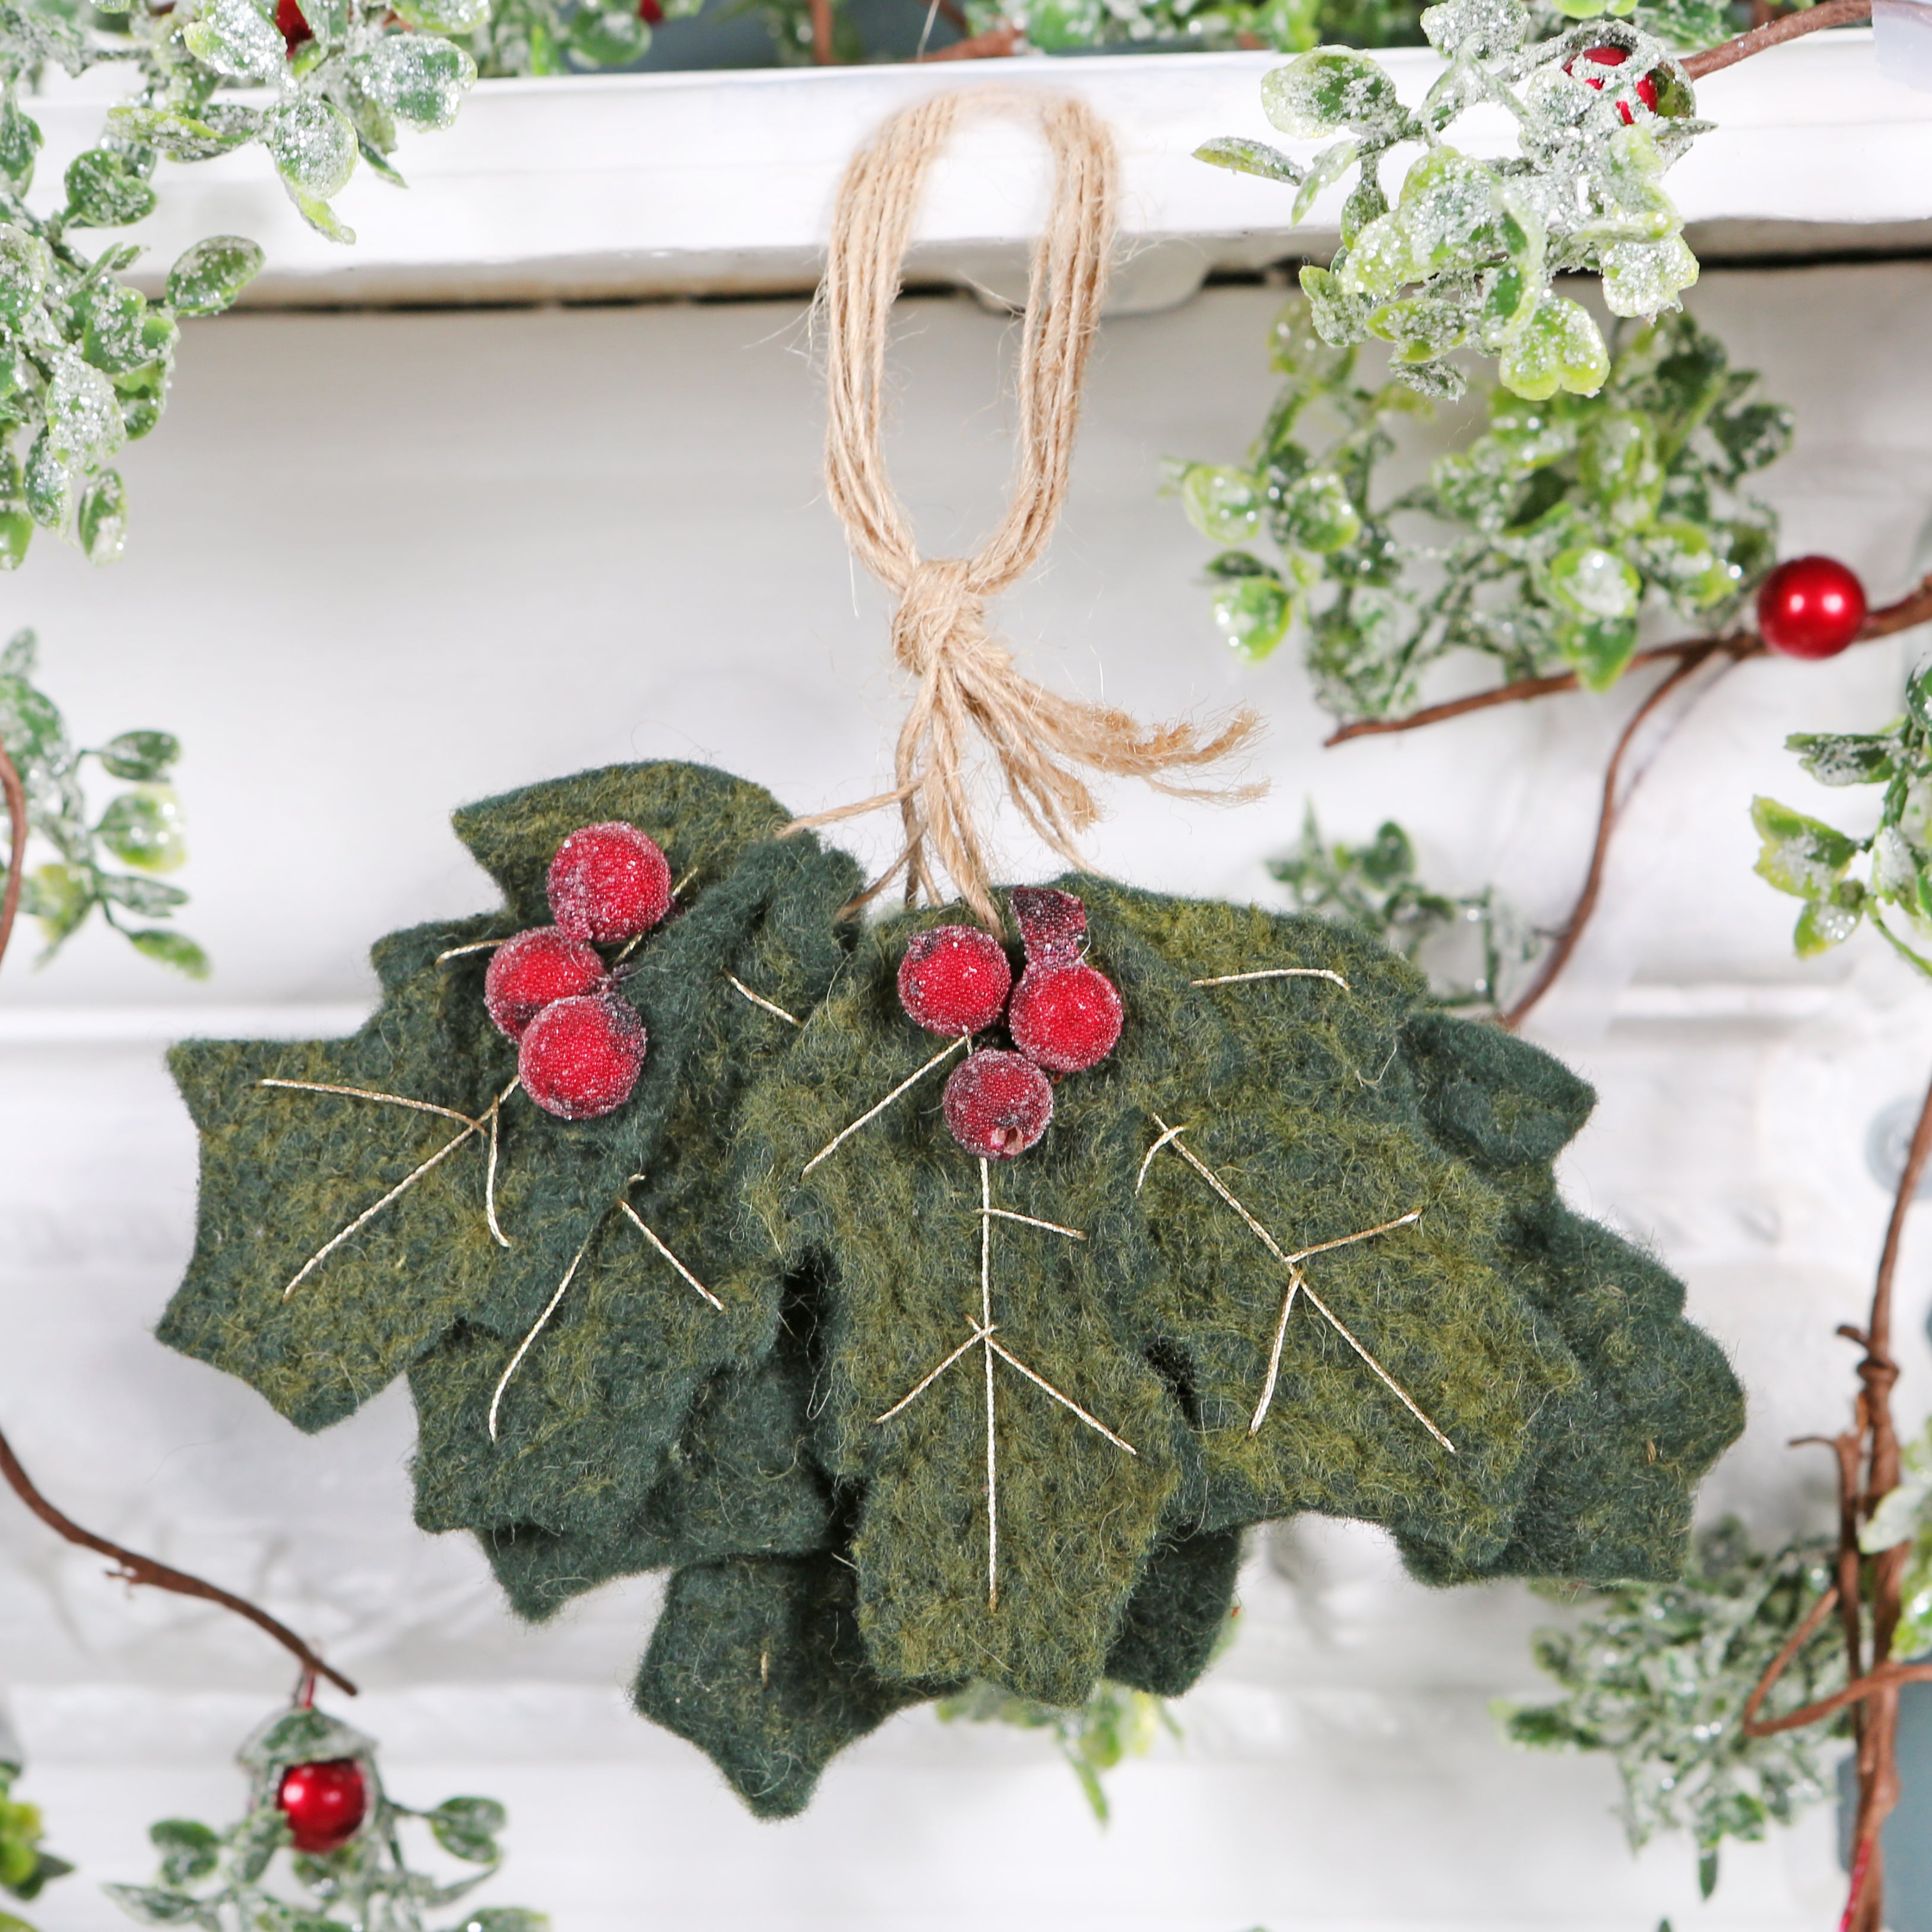 Hanging Holly - Fused glass Festive hanging Yuletide Christmas tree/  window/ wall ornament. Festive holly leaves adorned with red berries.